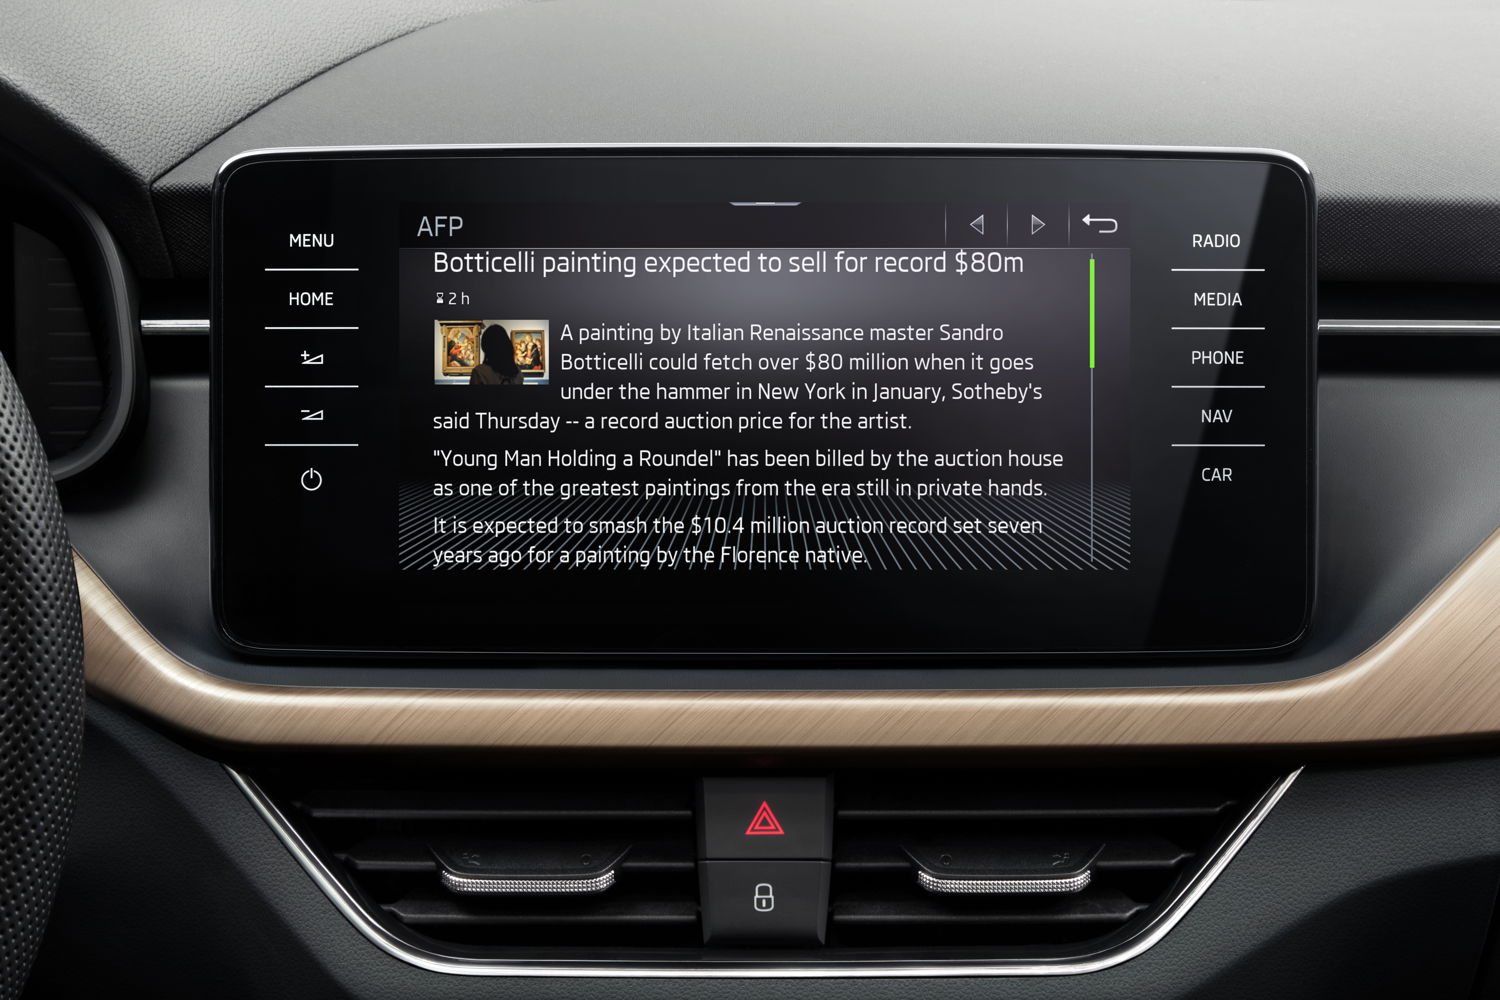 The News App offers ŠKODA drivers and passengers a new way to find out the latest news. These will be listed on the central display of the third-generation infotainment systems.